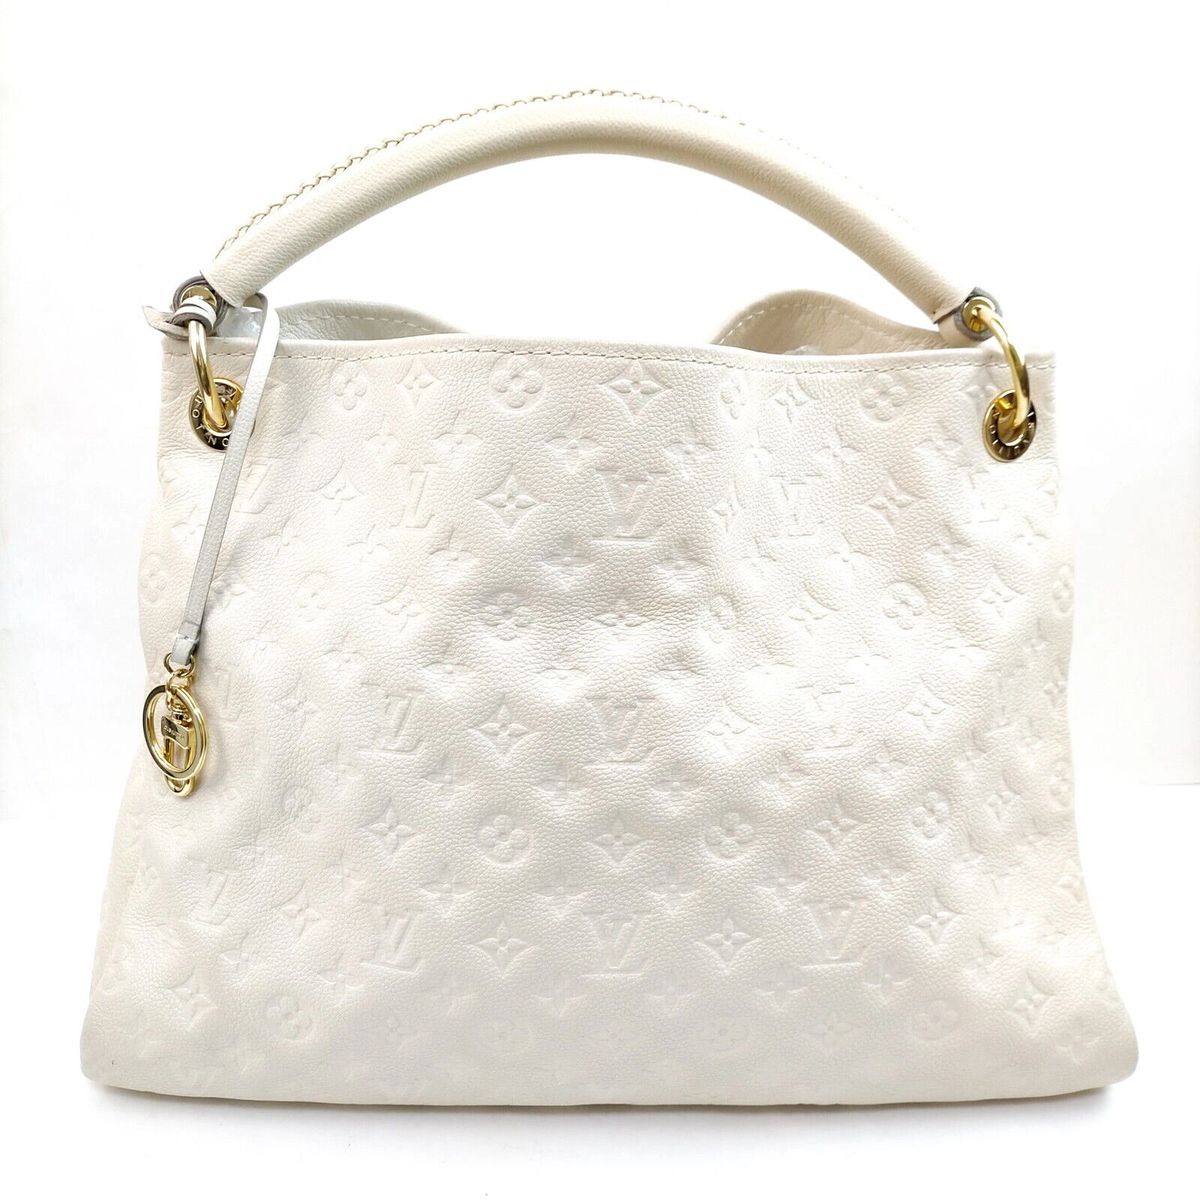 Pre-owned Authentic Louis Vuitton LV Hand Bag Artsy MM White